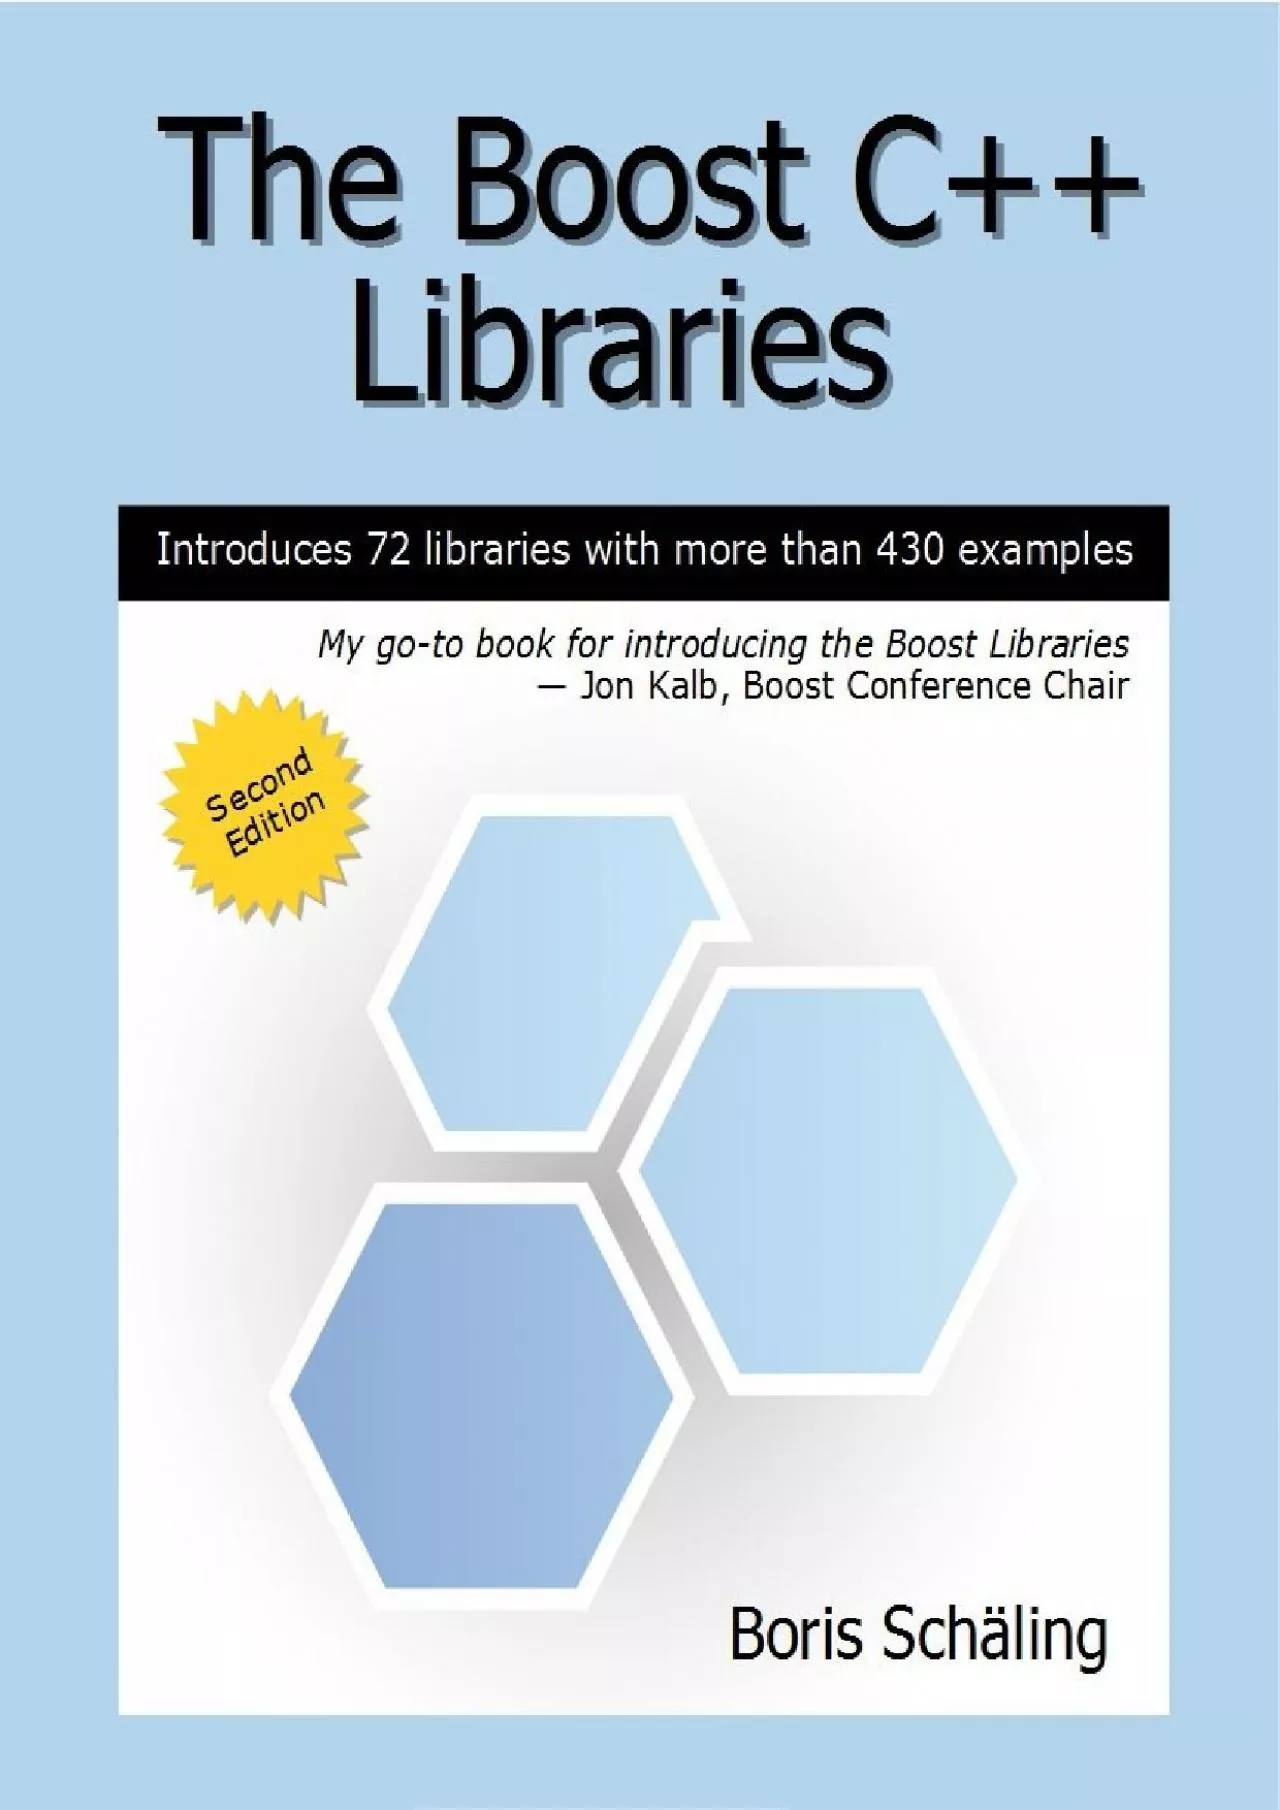 [READING BOOK]-The Boost C++ Libraries